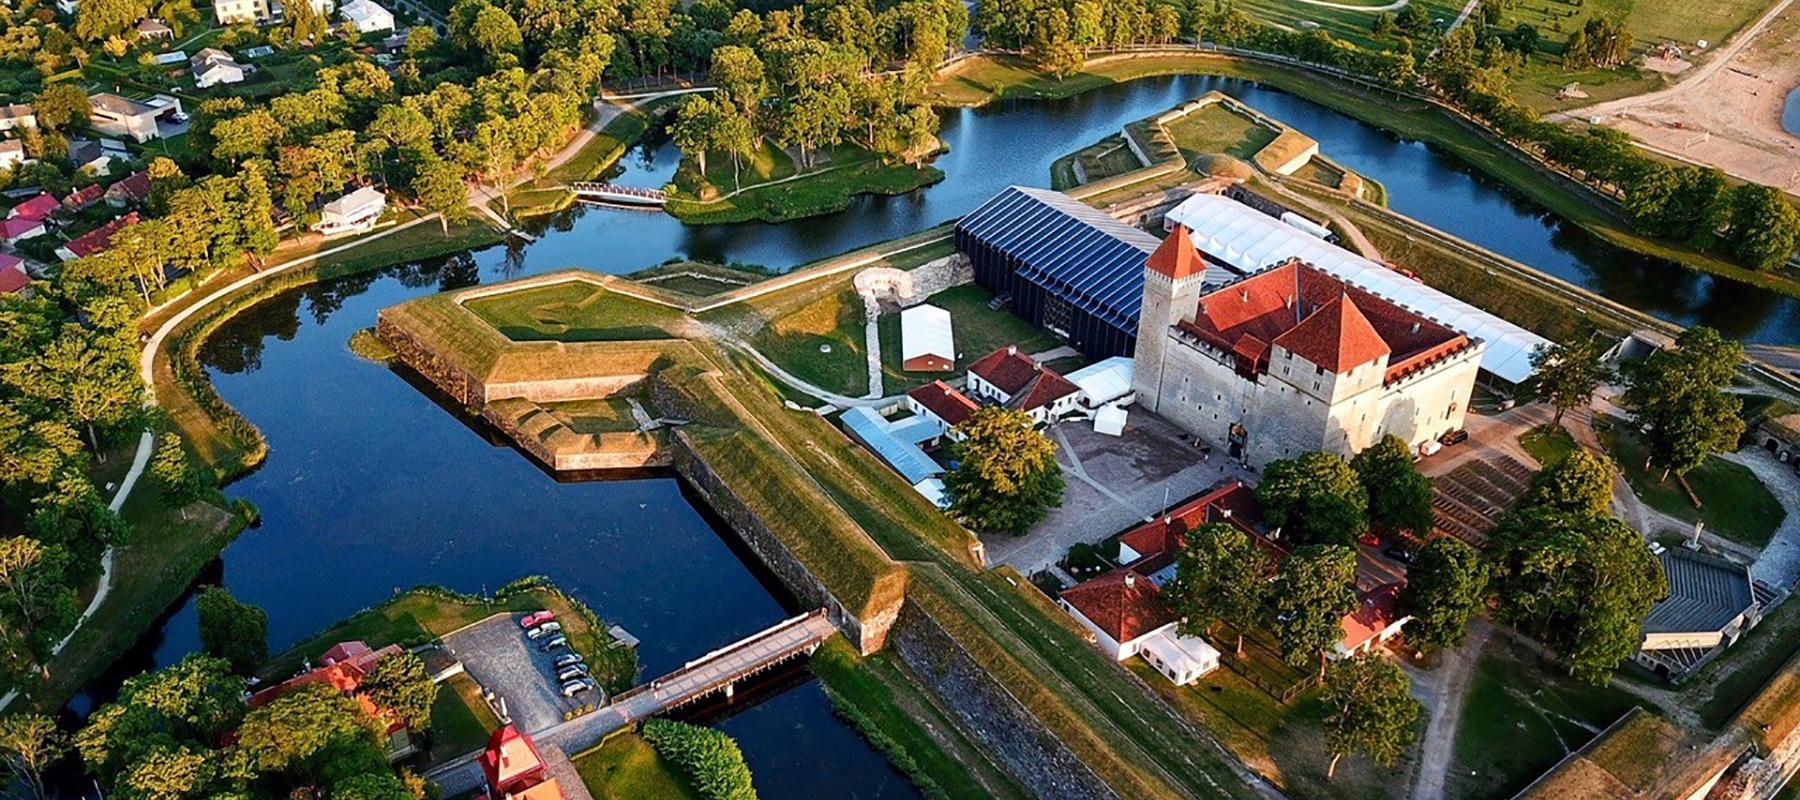 Saaremaa Opera Festival, which takes place in the middle of the summer in the historical courtyard of Kuressaare Castle, is the most popular opera fes